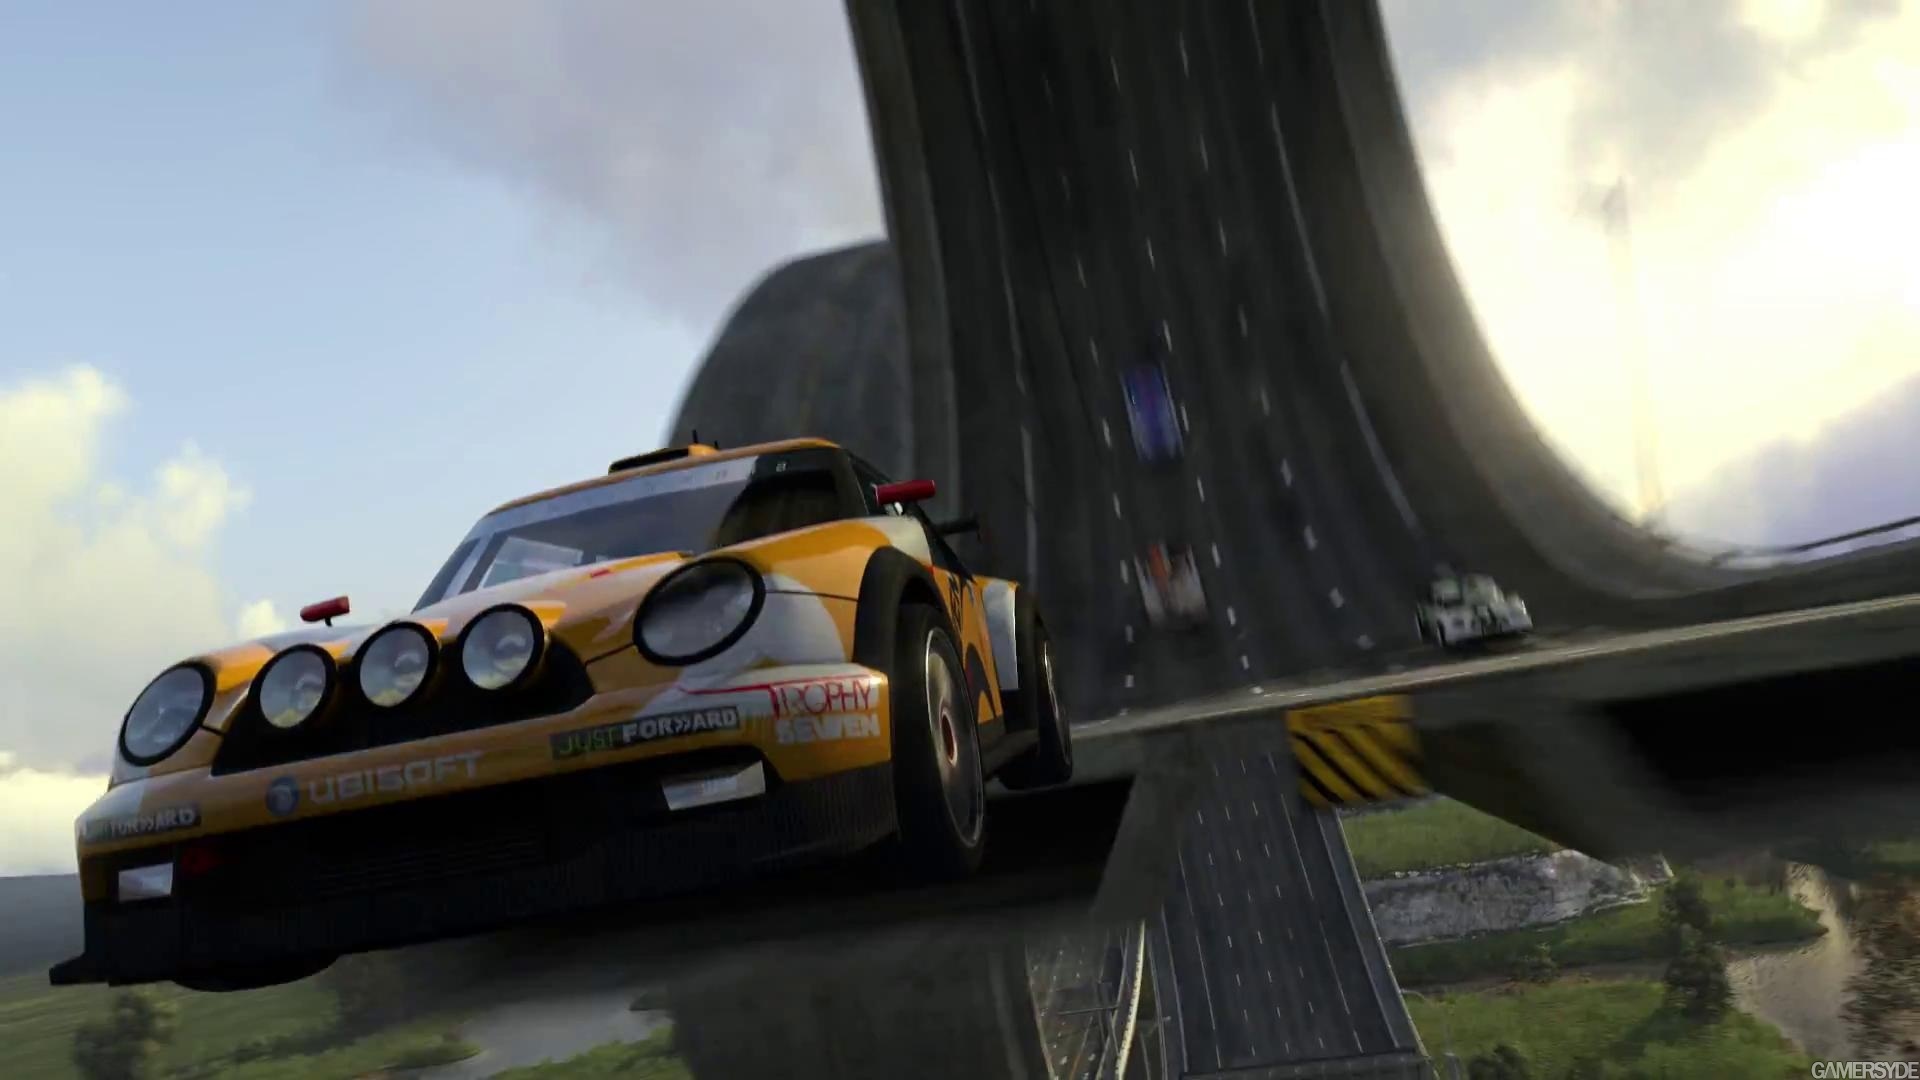 trackmania 2 valley free download for pc